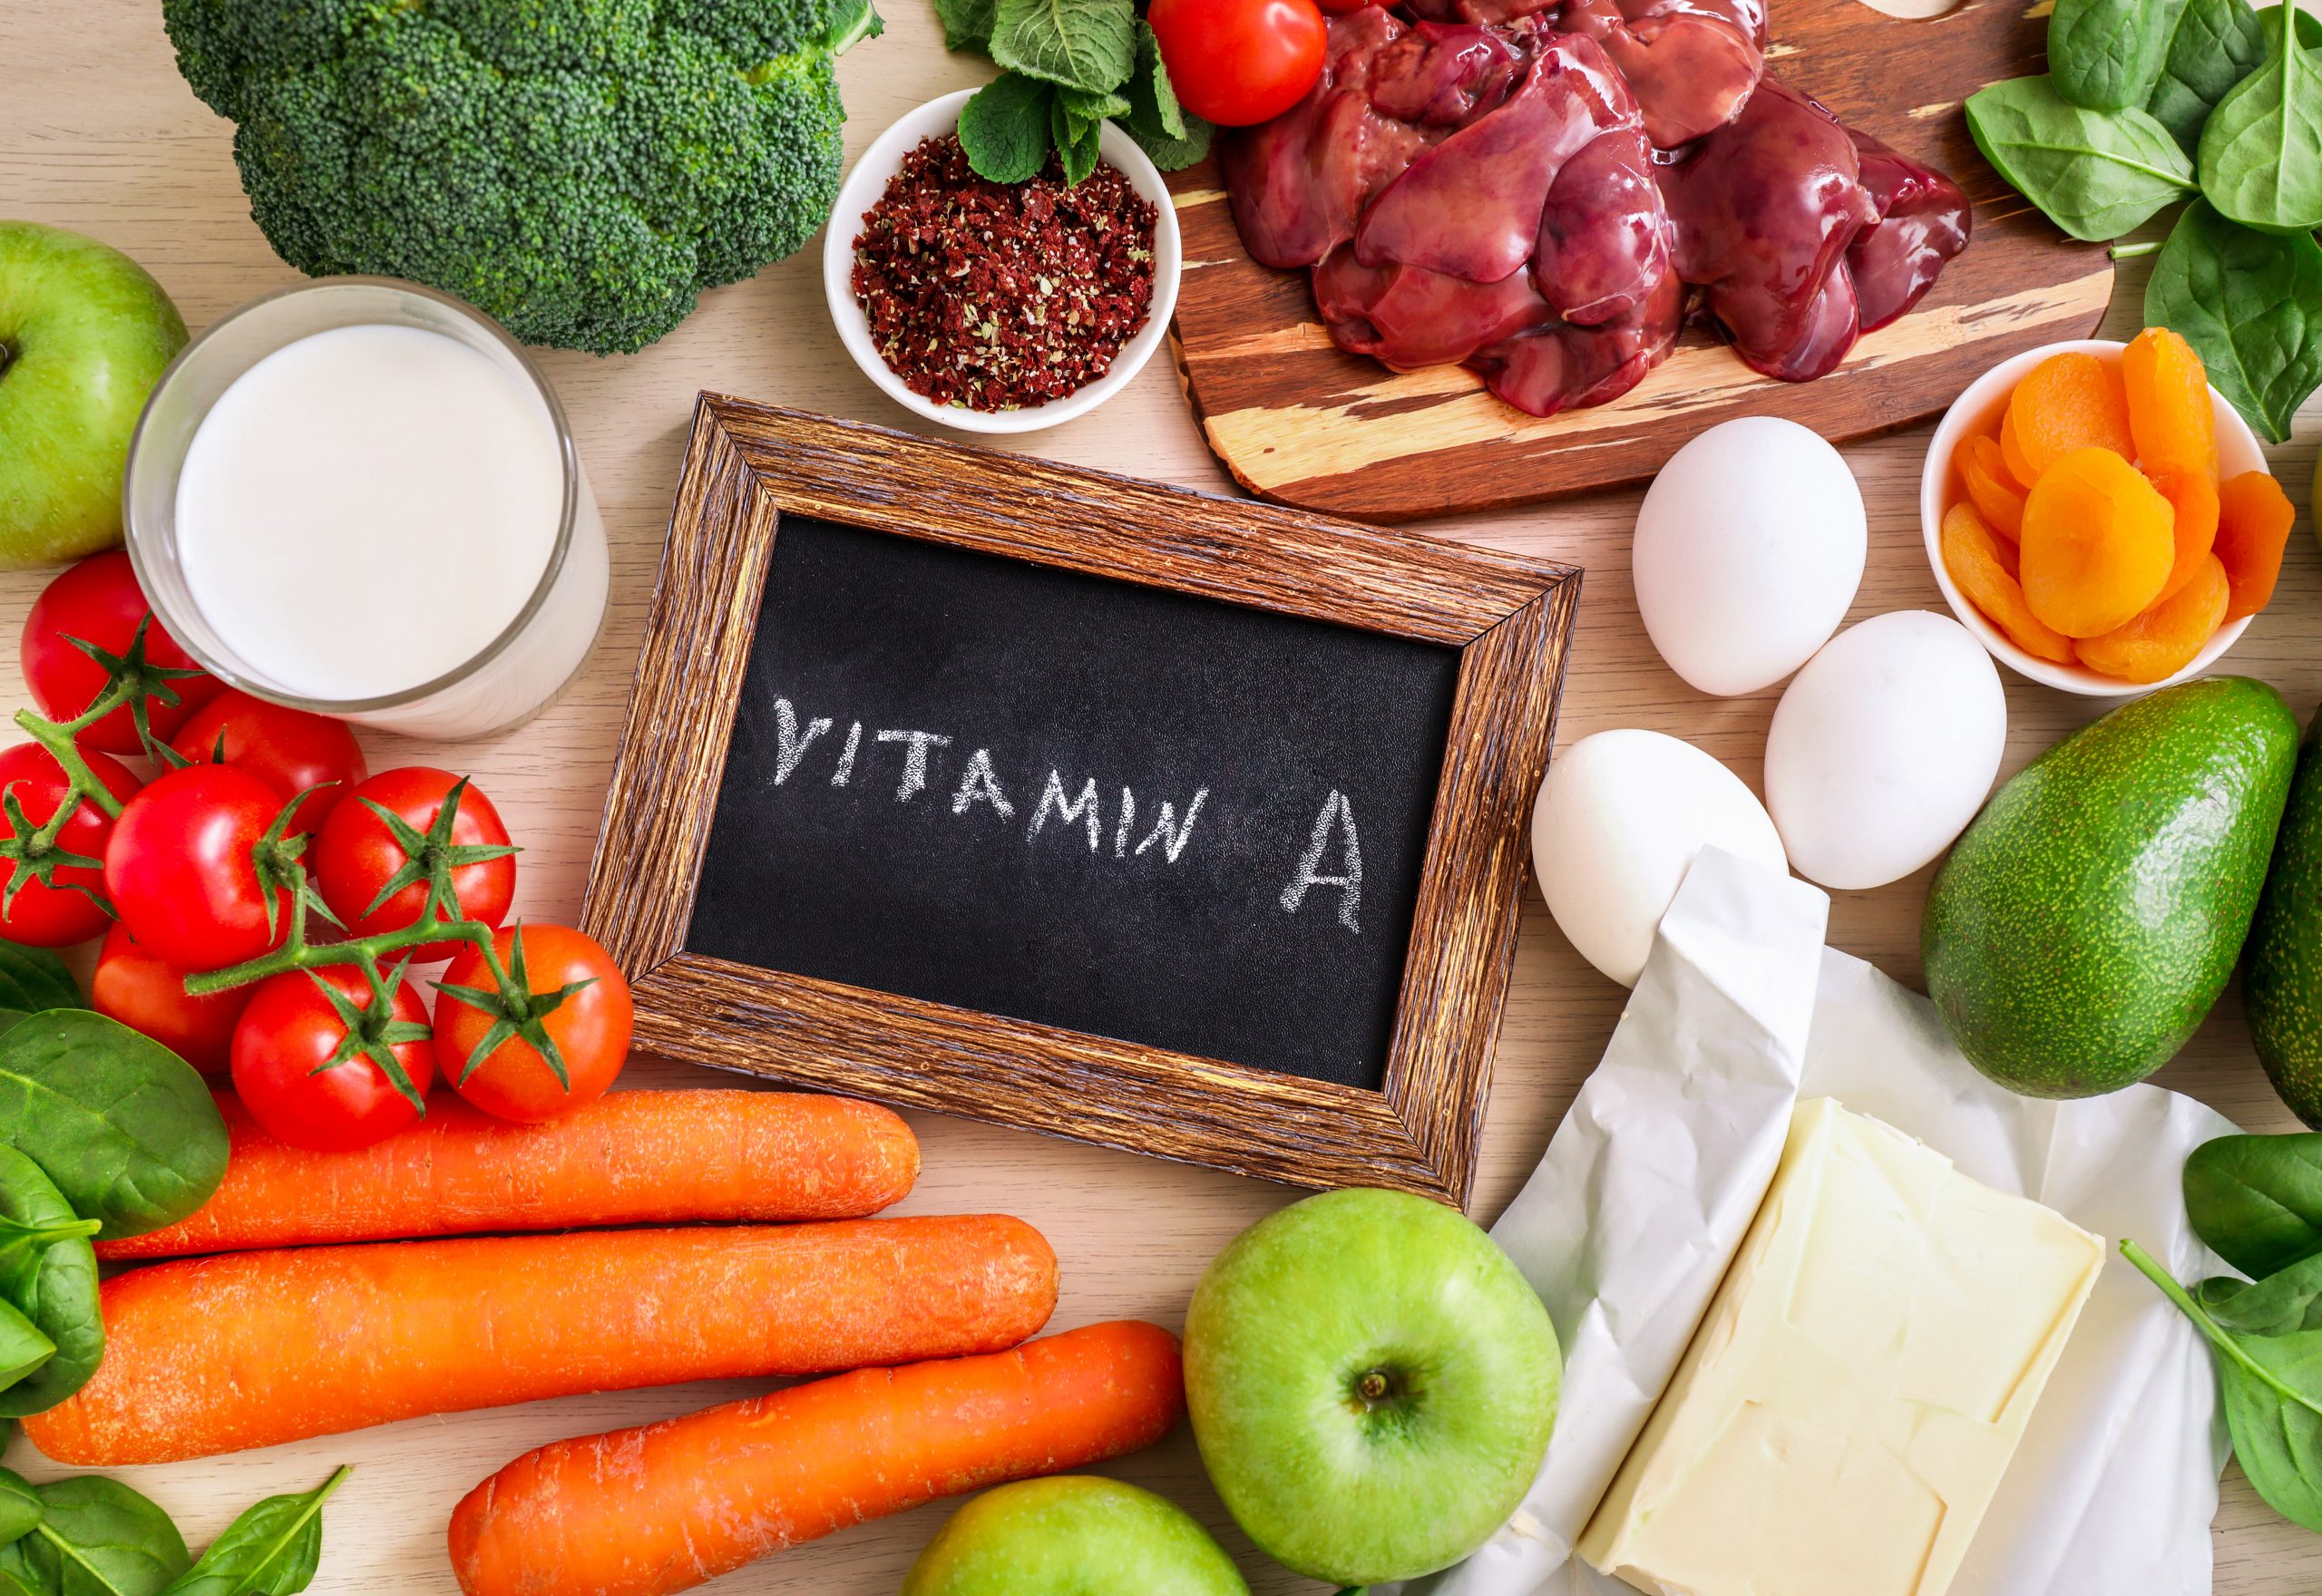 Which Vitamin Deficiencies Cause Hair Loss?, Wimpole Clinic